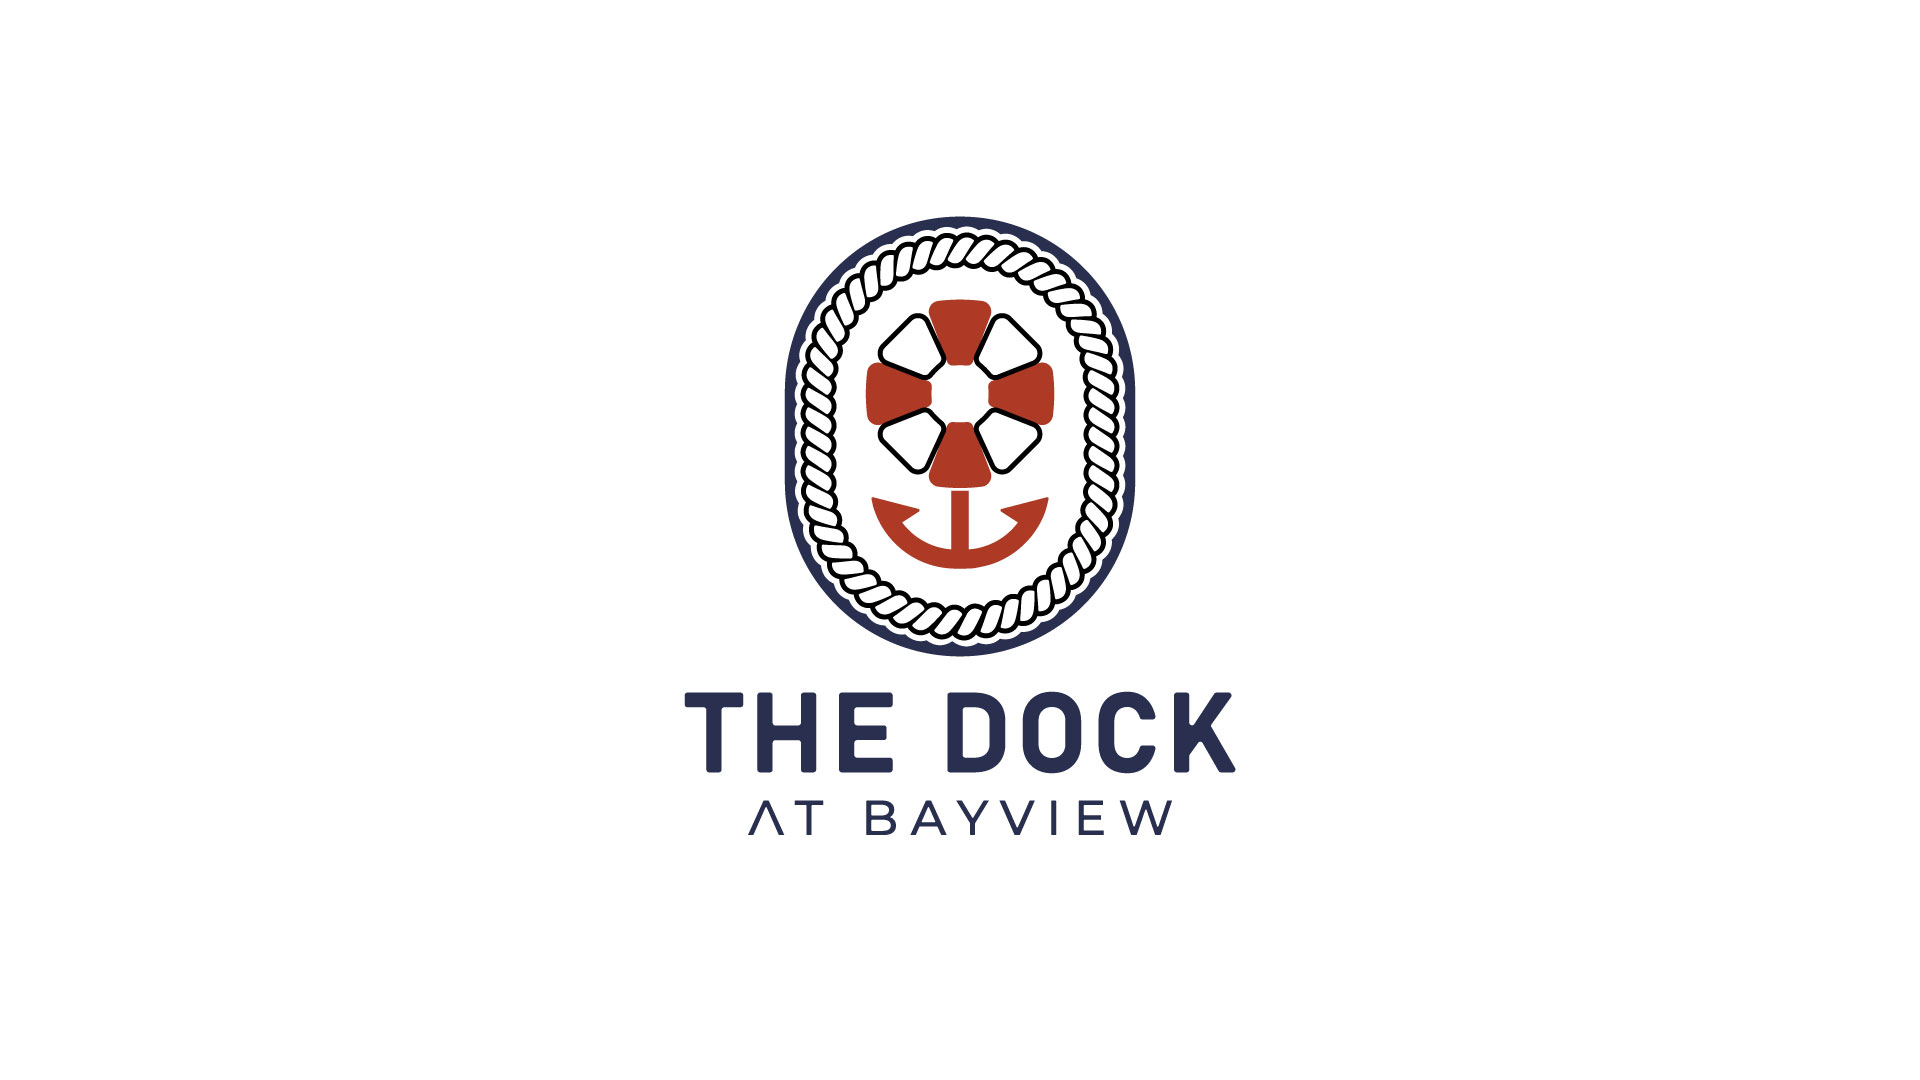 The Dock At Bayview 16862 E Boileaus G Dock, Bayview, ID 83803